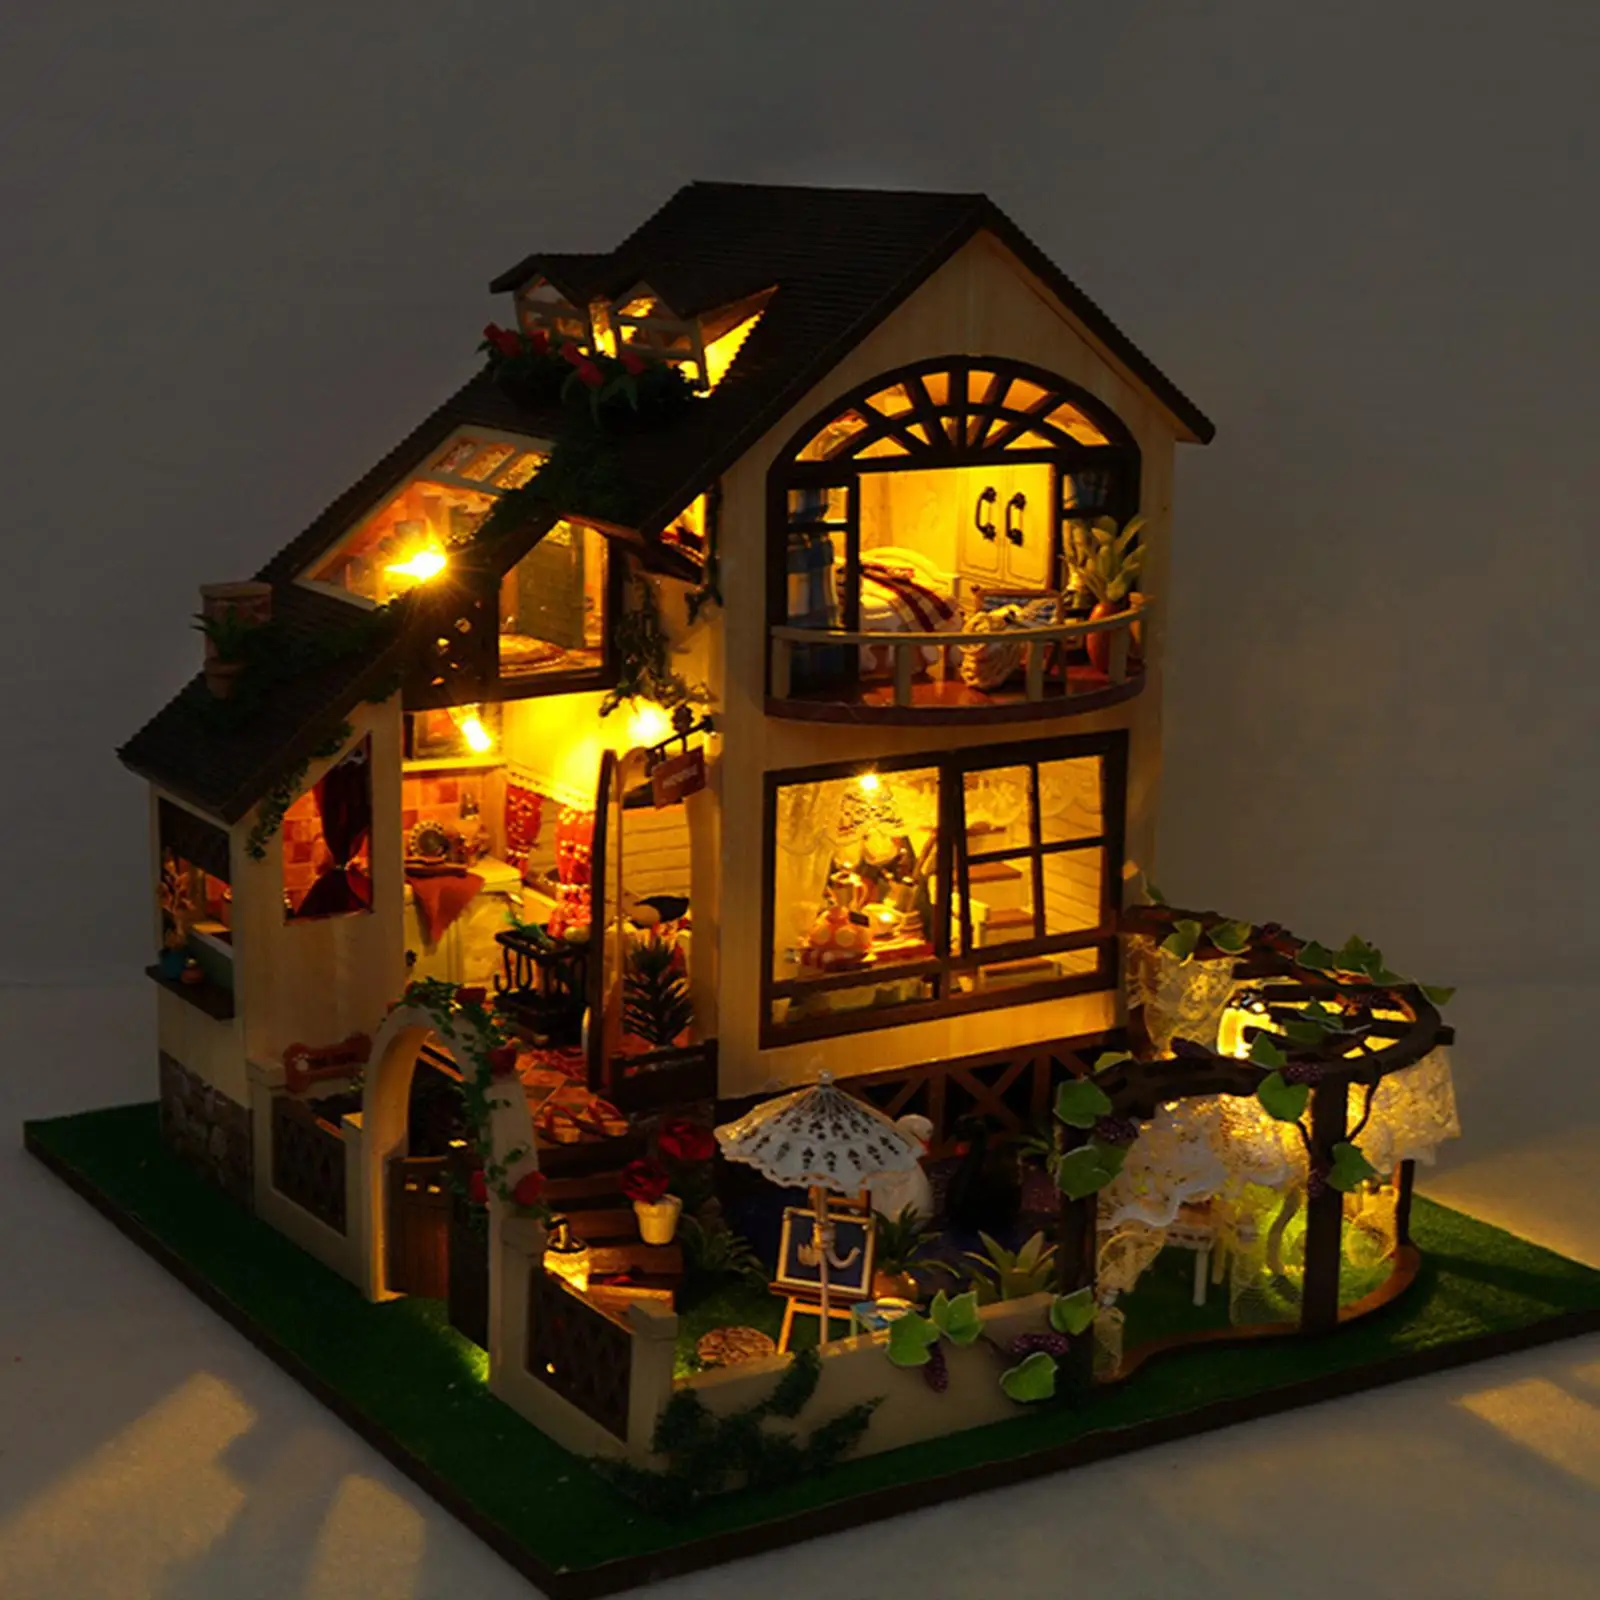 DIY Wooden Miniature Dollhouse DIY Crafts Home Decor Decorations Mini House Model 3D Puzzles for Kids Birthday Gift Friends